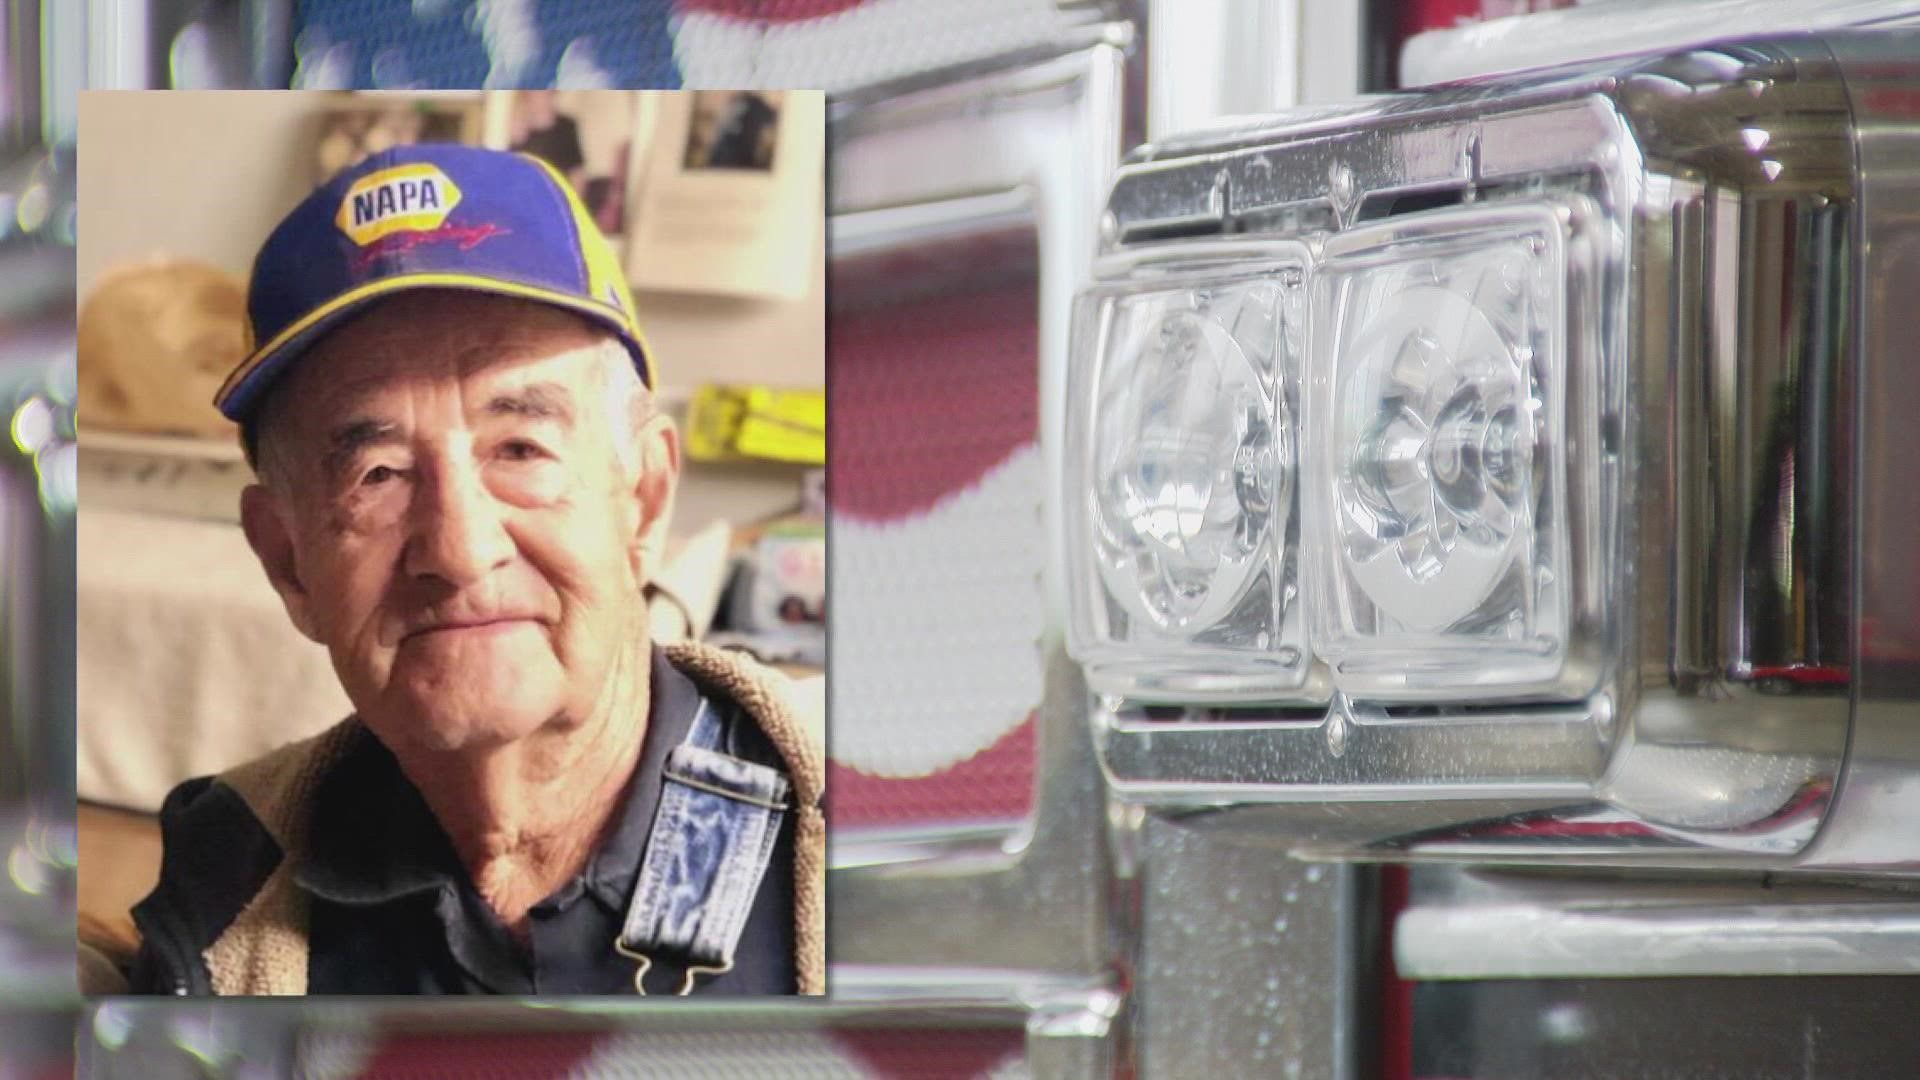 Harold Cordova had started working with the Manassa Fire Department when he was 18-years-old. He spent his life dedicated to protecting others and saving lives.